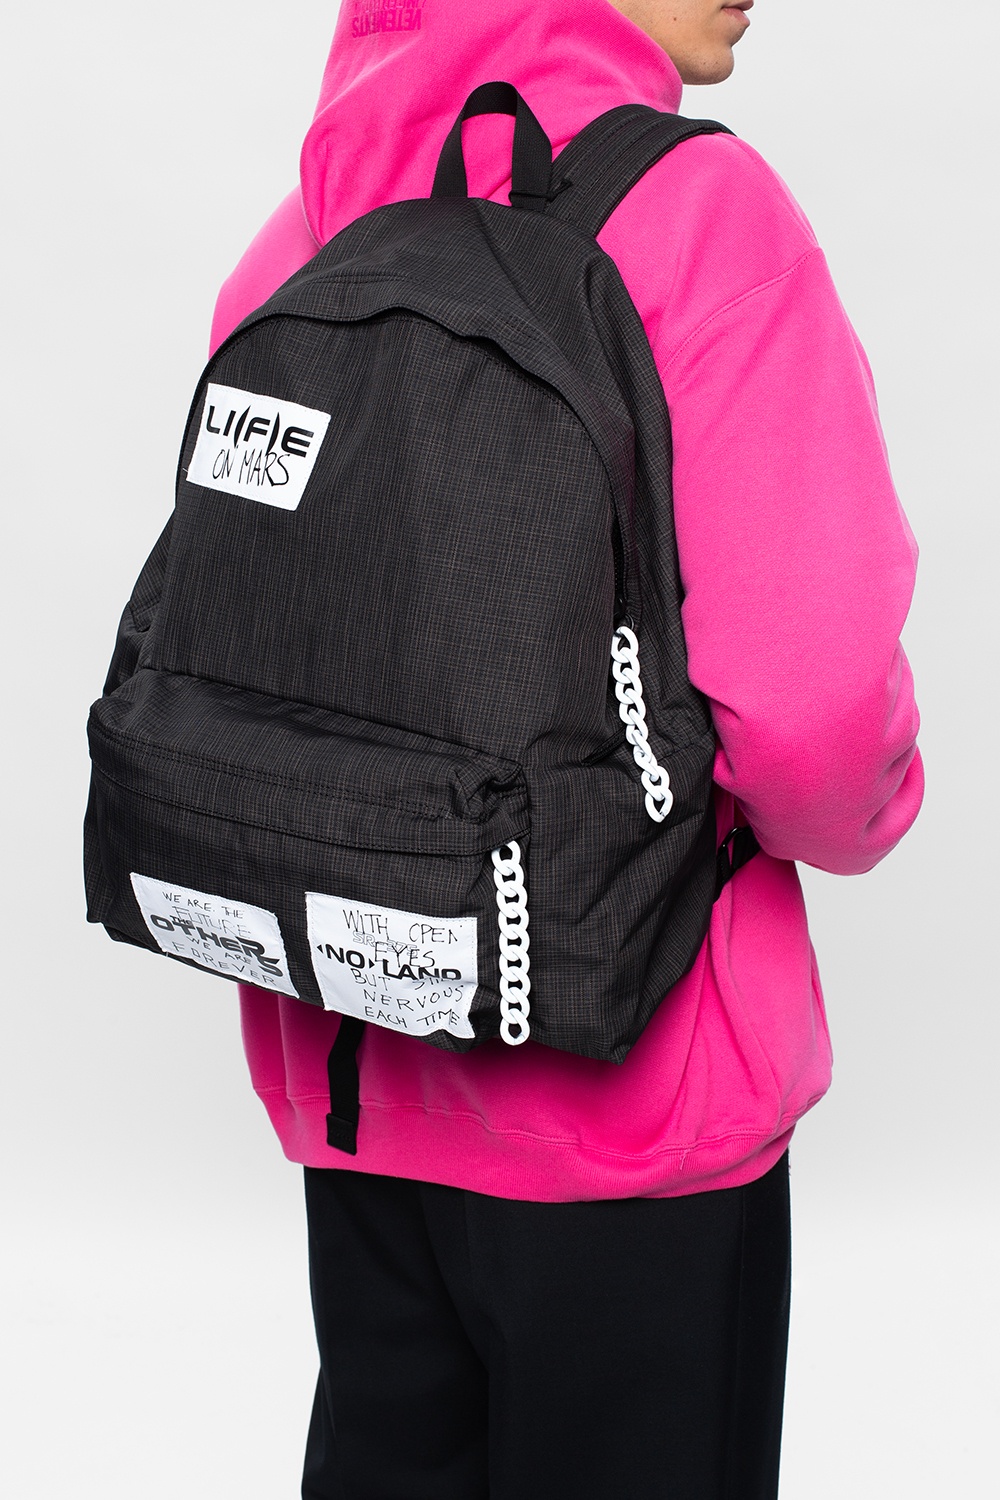 Eastpak Have Once Again Collaborated With Raf Simons